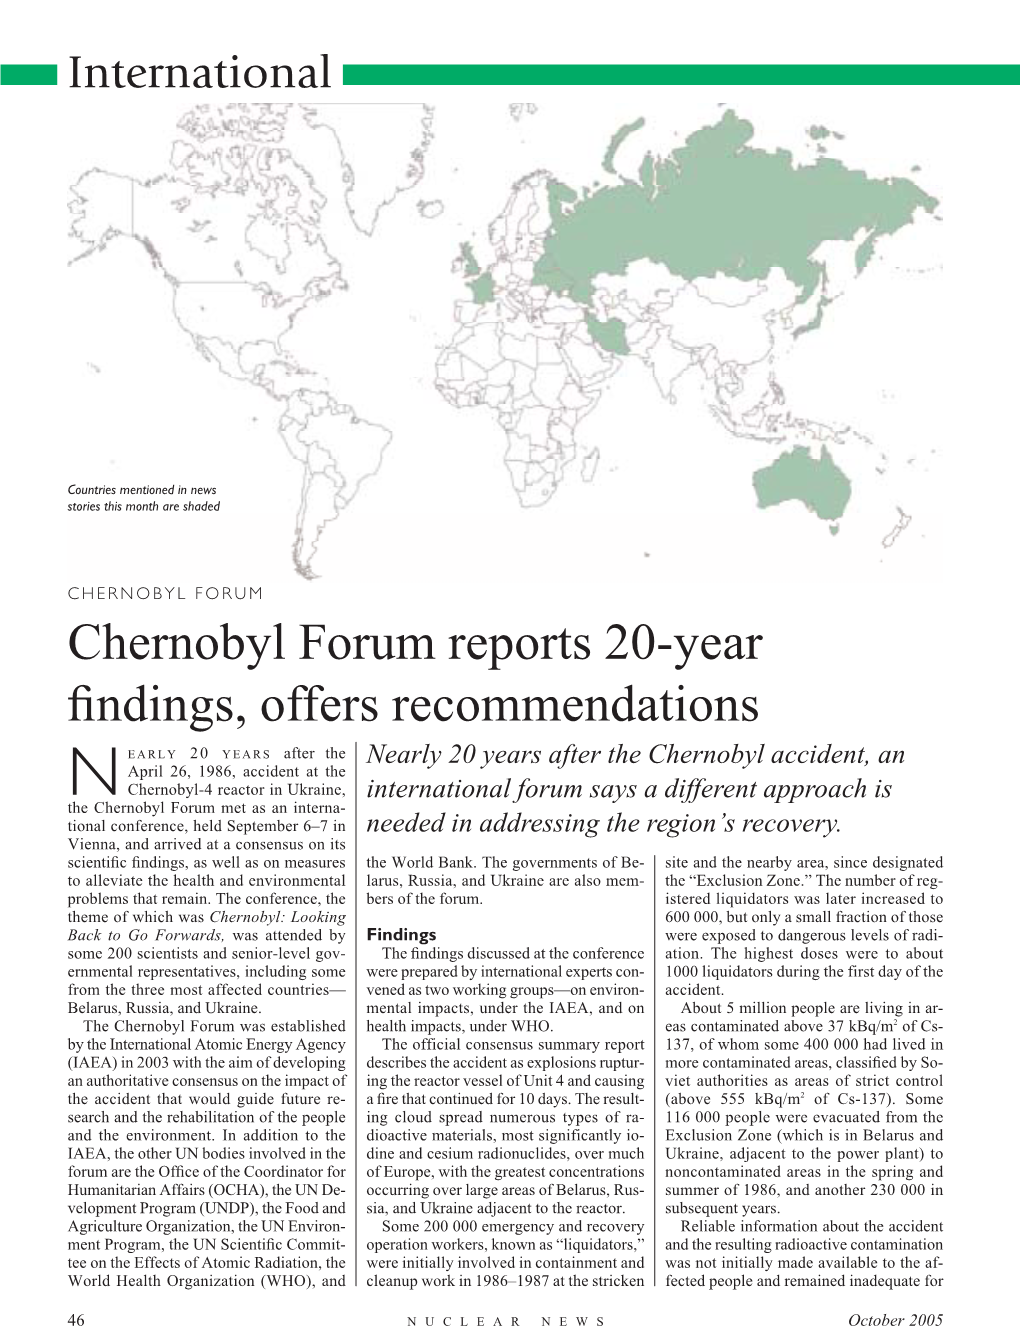 Chernobyl Forum Reports 20-Year Findings, Offers Recommendations